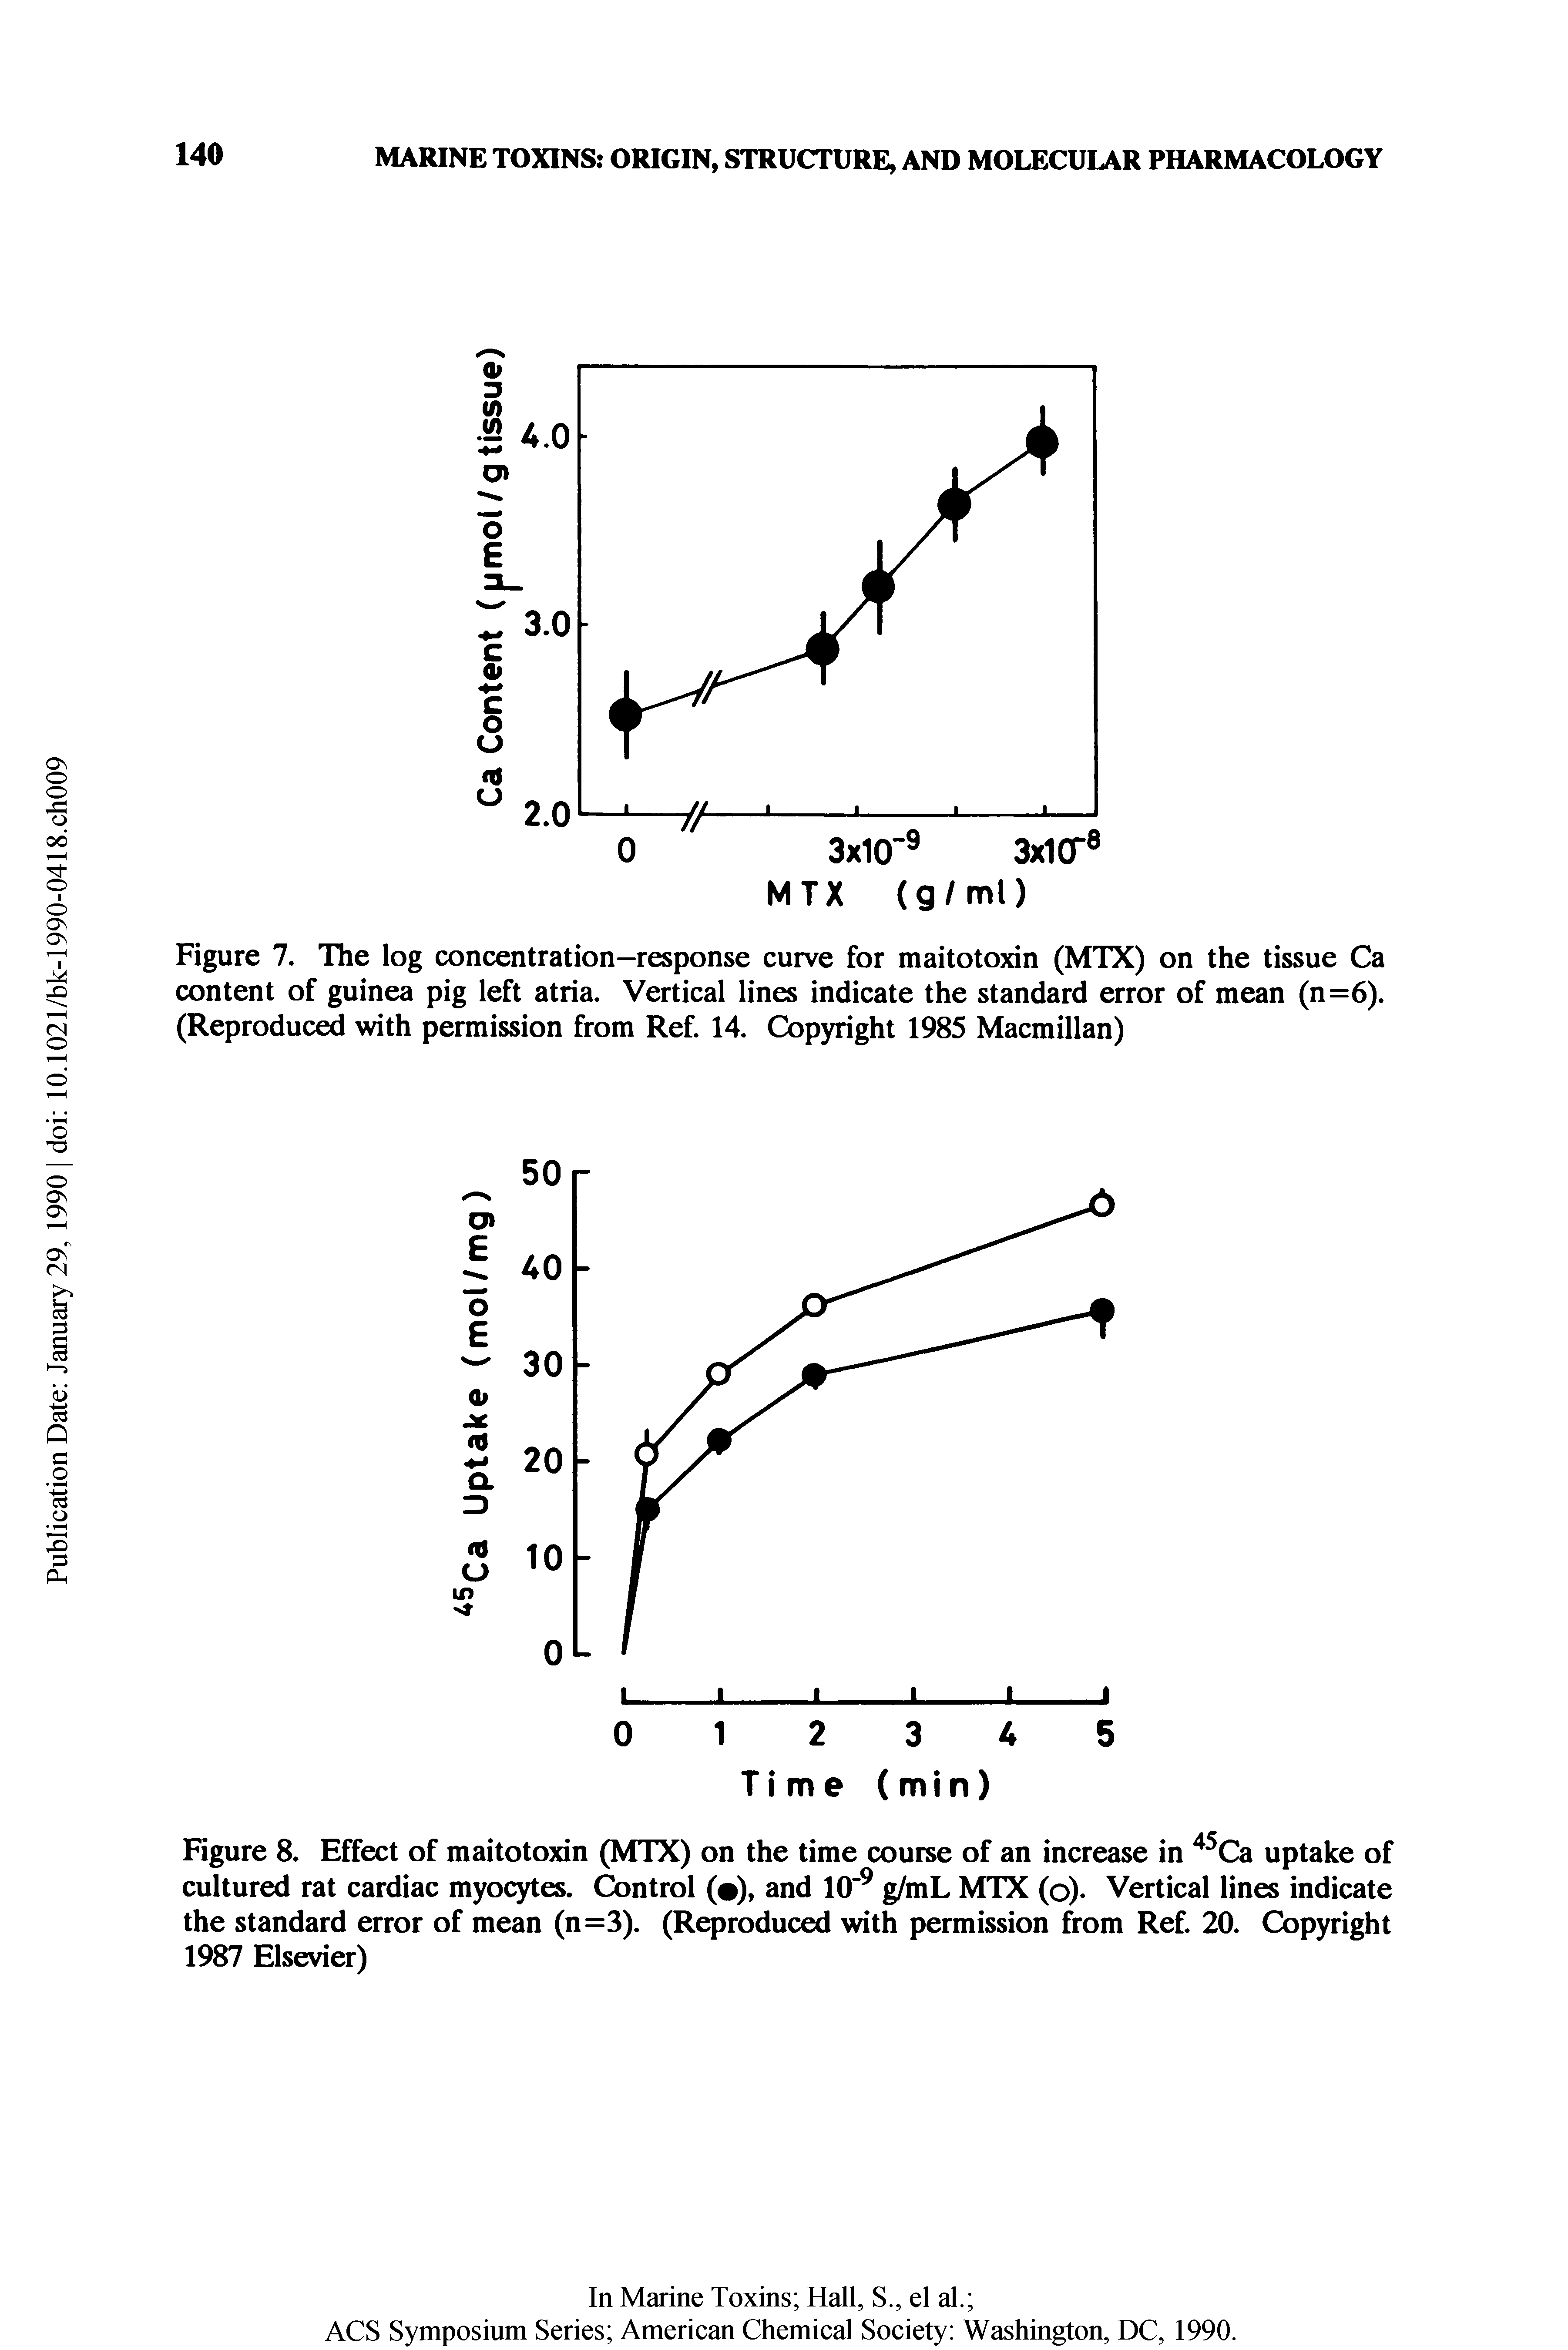 Figure 8. Effect of maitotoxin (MTX) on the time course of an increase in Ca uptake of cultured rat cardiac myocytes. Cbntrol ( ), and 10 g/mL MTX (o). Vertical lines indicate the standard error of mean (n=3). (Reproduced with permission from Ref. 20. Copyright 1987 Elsevier)...